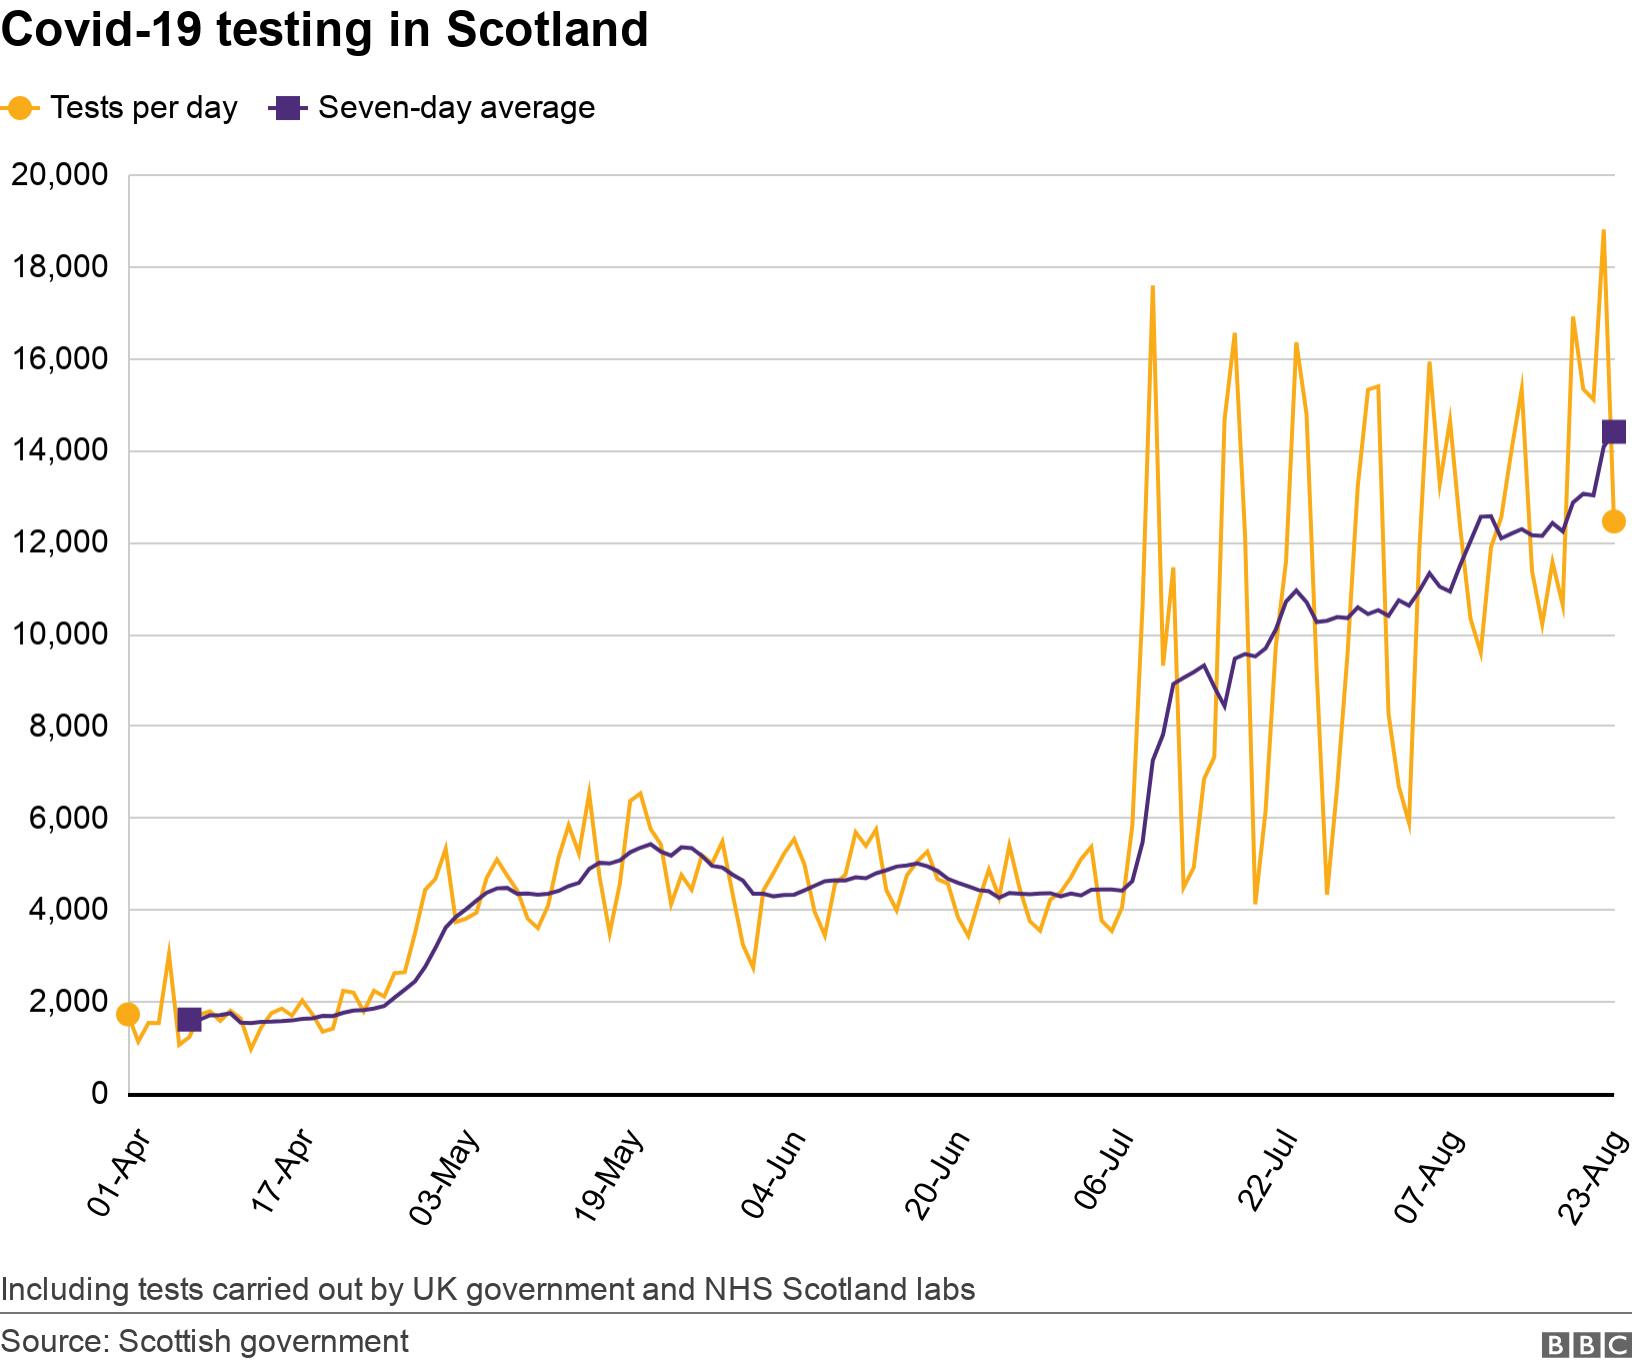 Covid-19 testing in Scotland. . Including tests carried out by UK government and NHS Scotland labs.